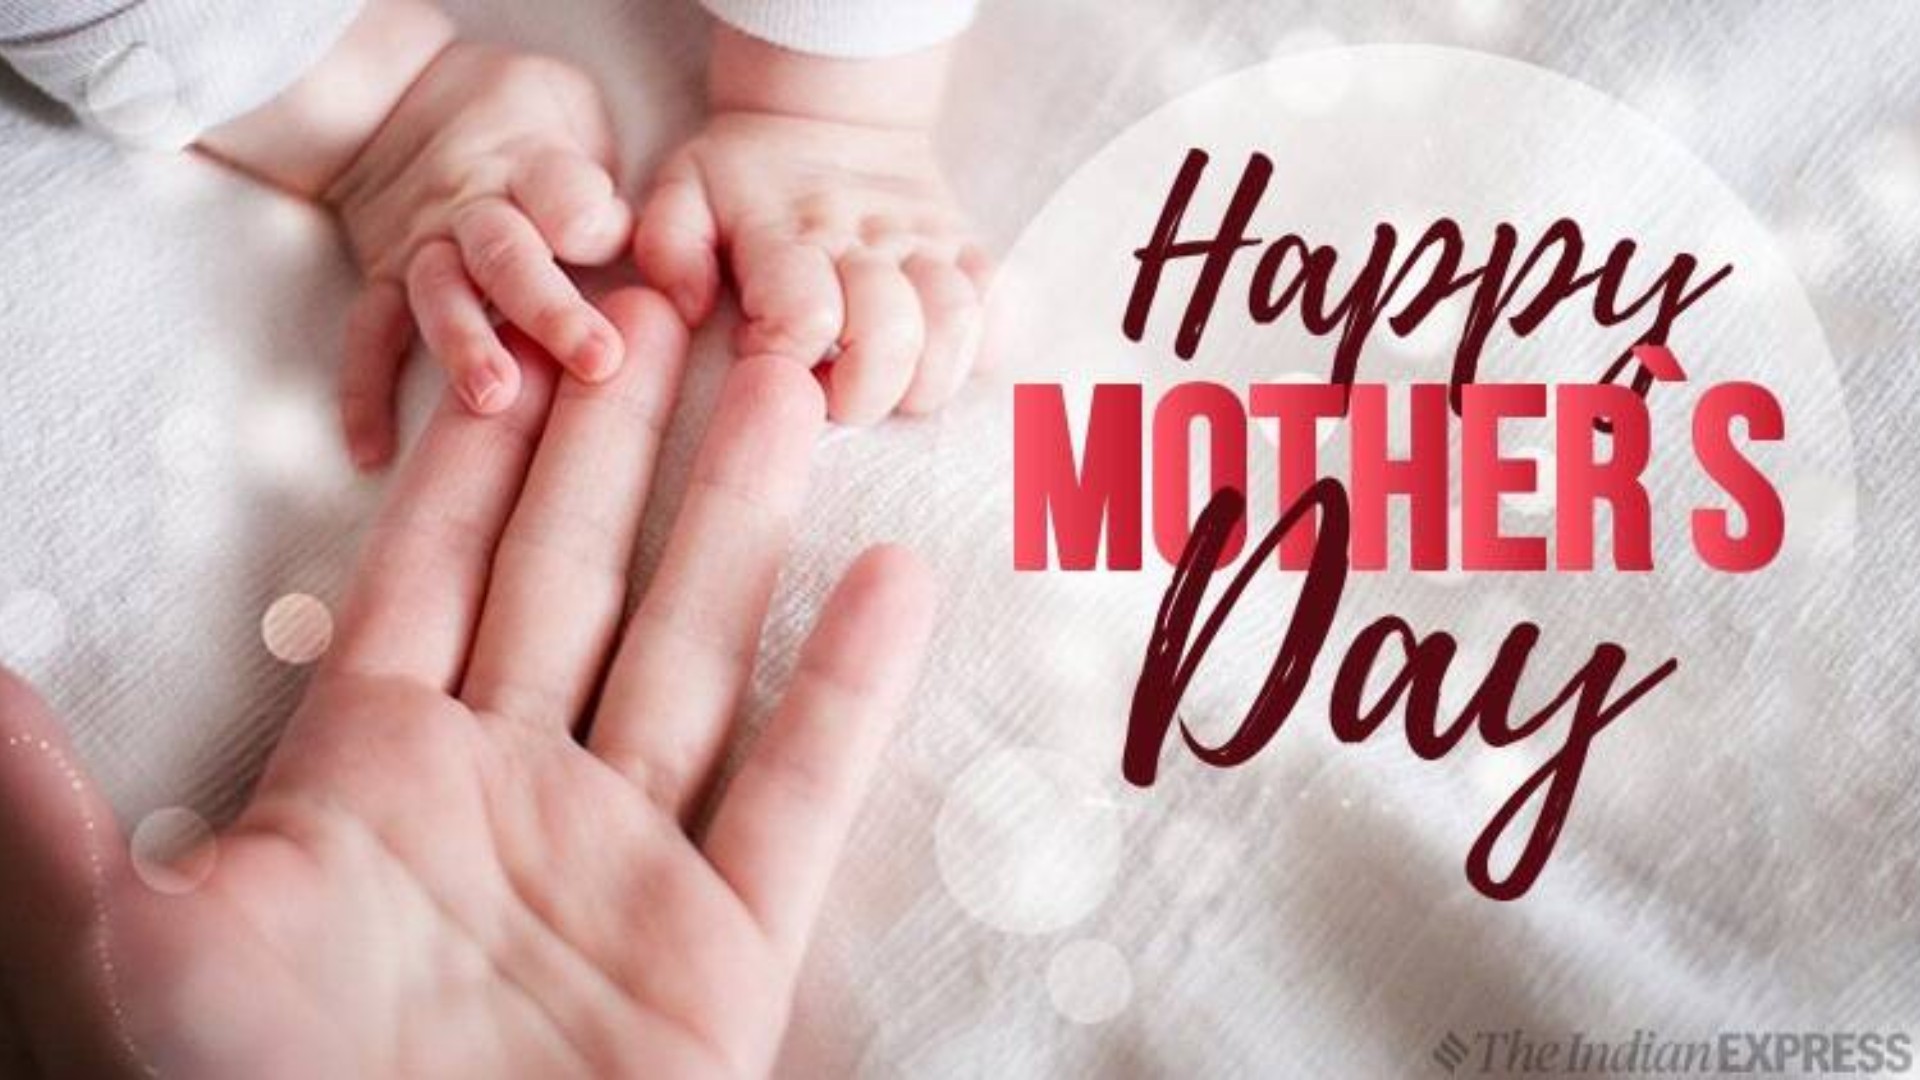 Mothers Day Wallpaper 1920x1080 1